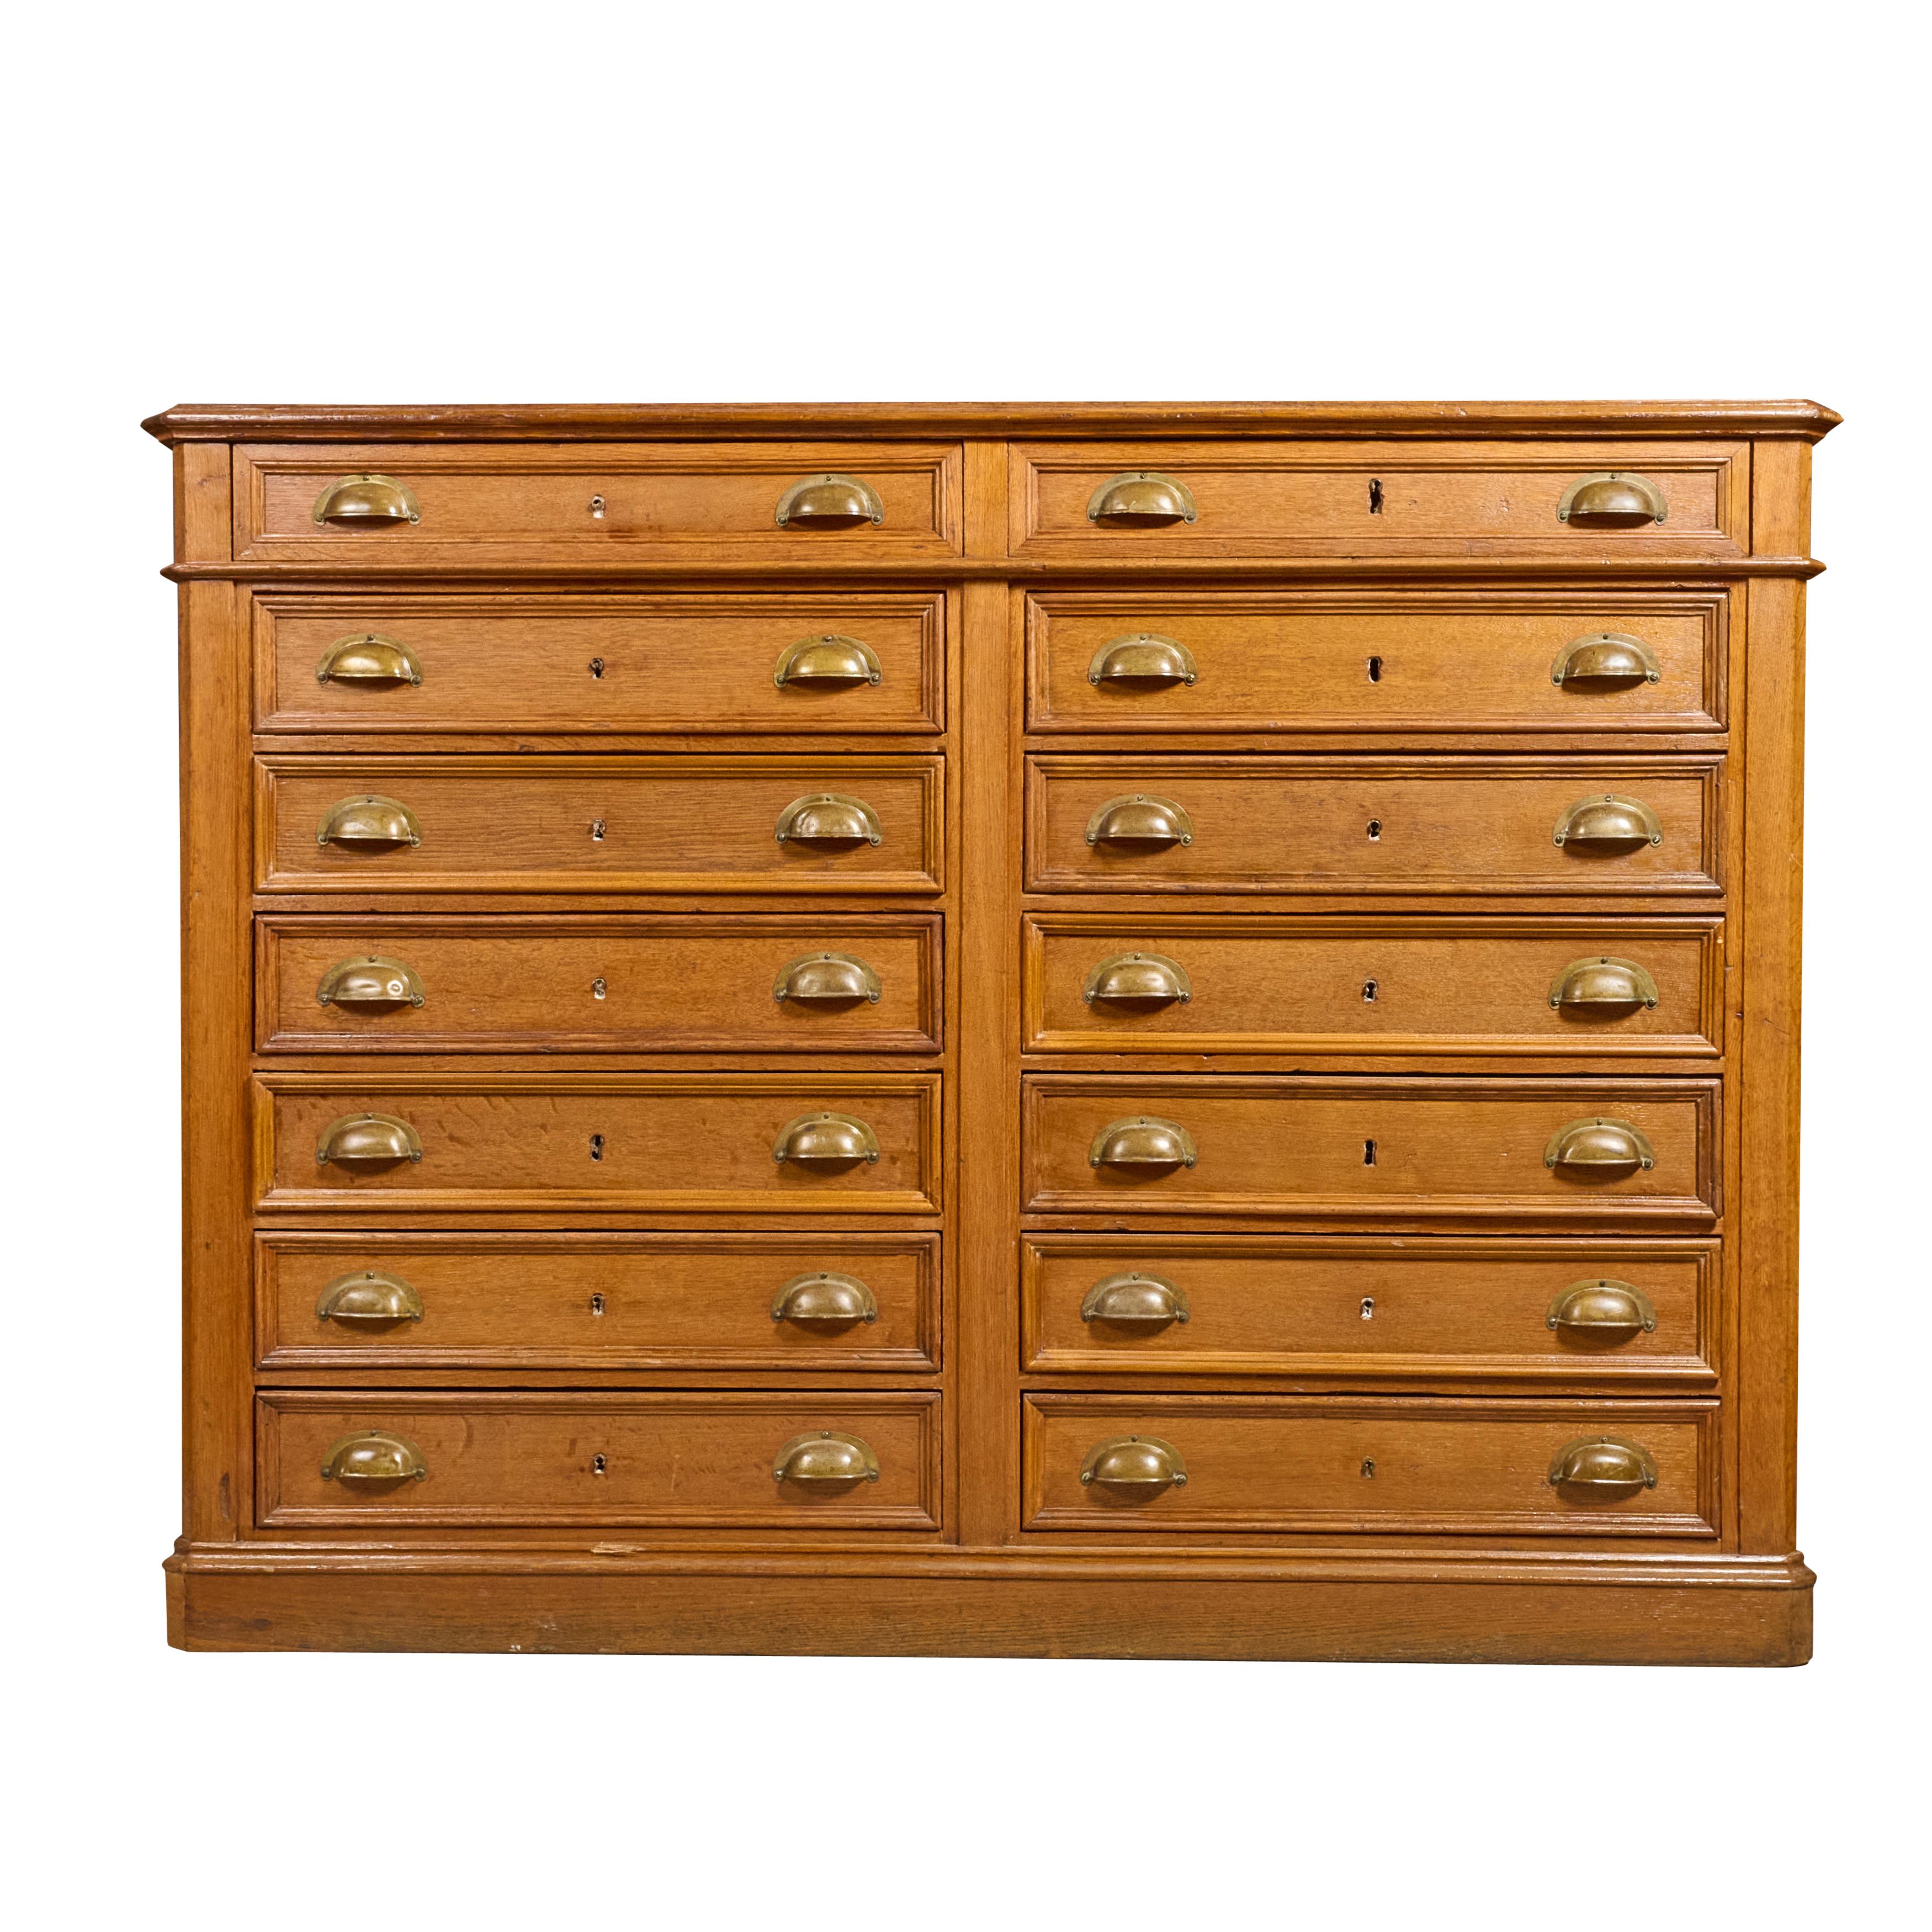 14 drawer oak collections cabinet with brass hardware. Great condition.

